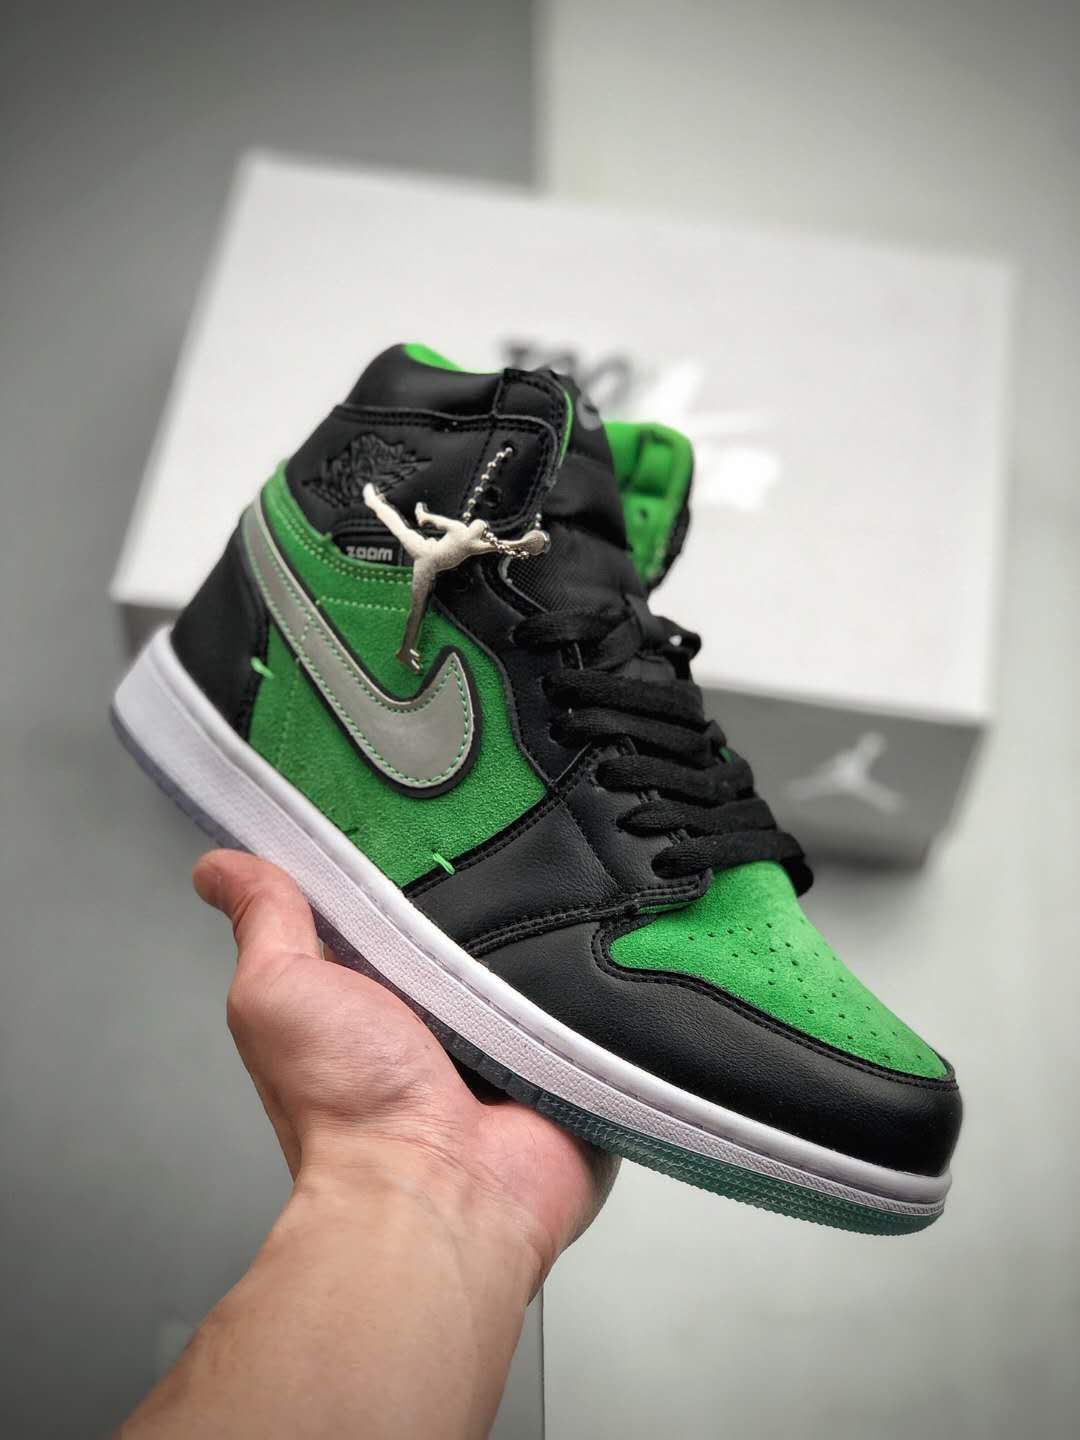 Air Jordan 1 High Zoom Rage Green CK6637-300: Premium Style with Vibrant Green Accents